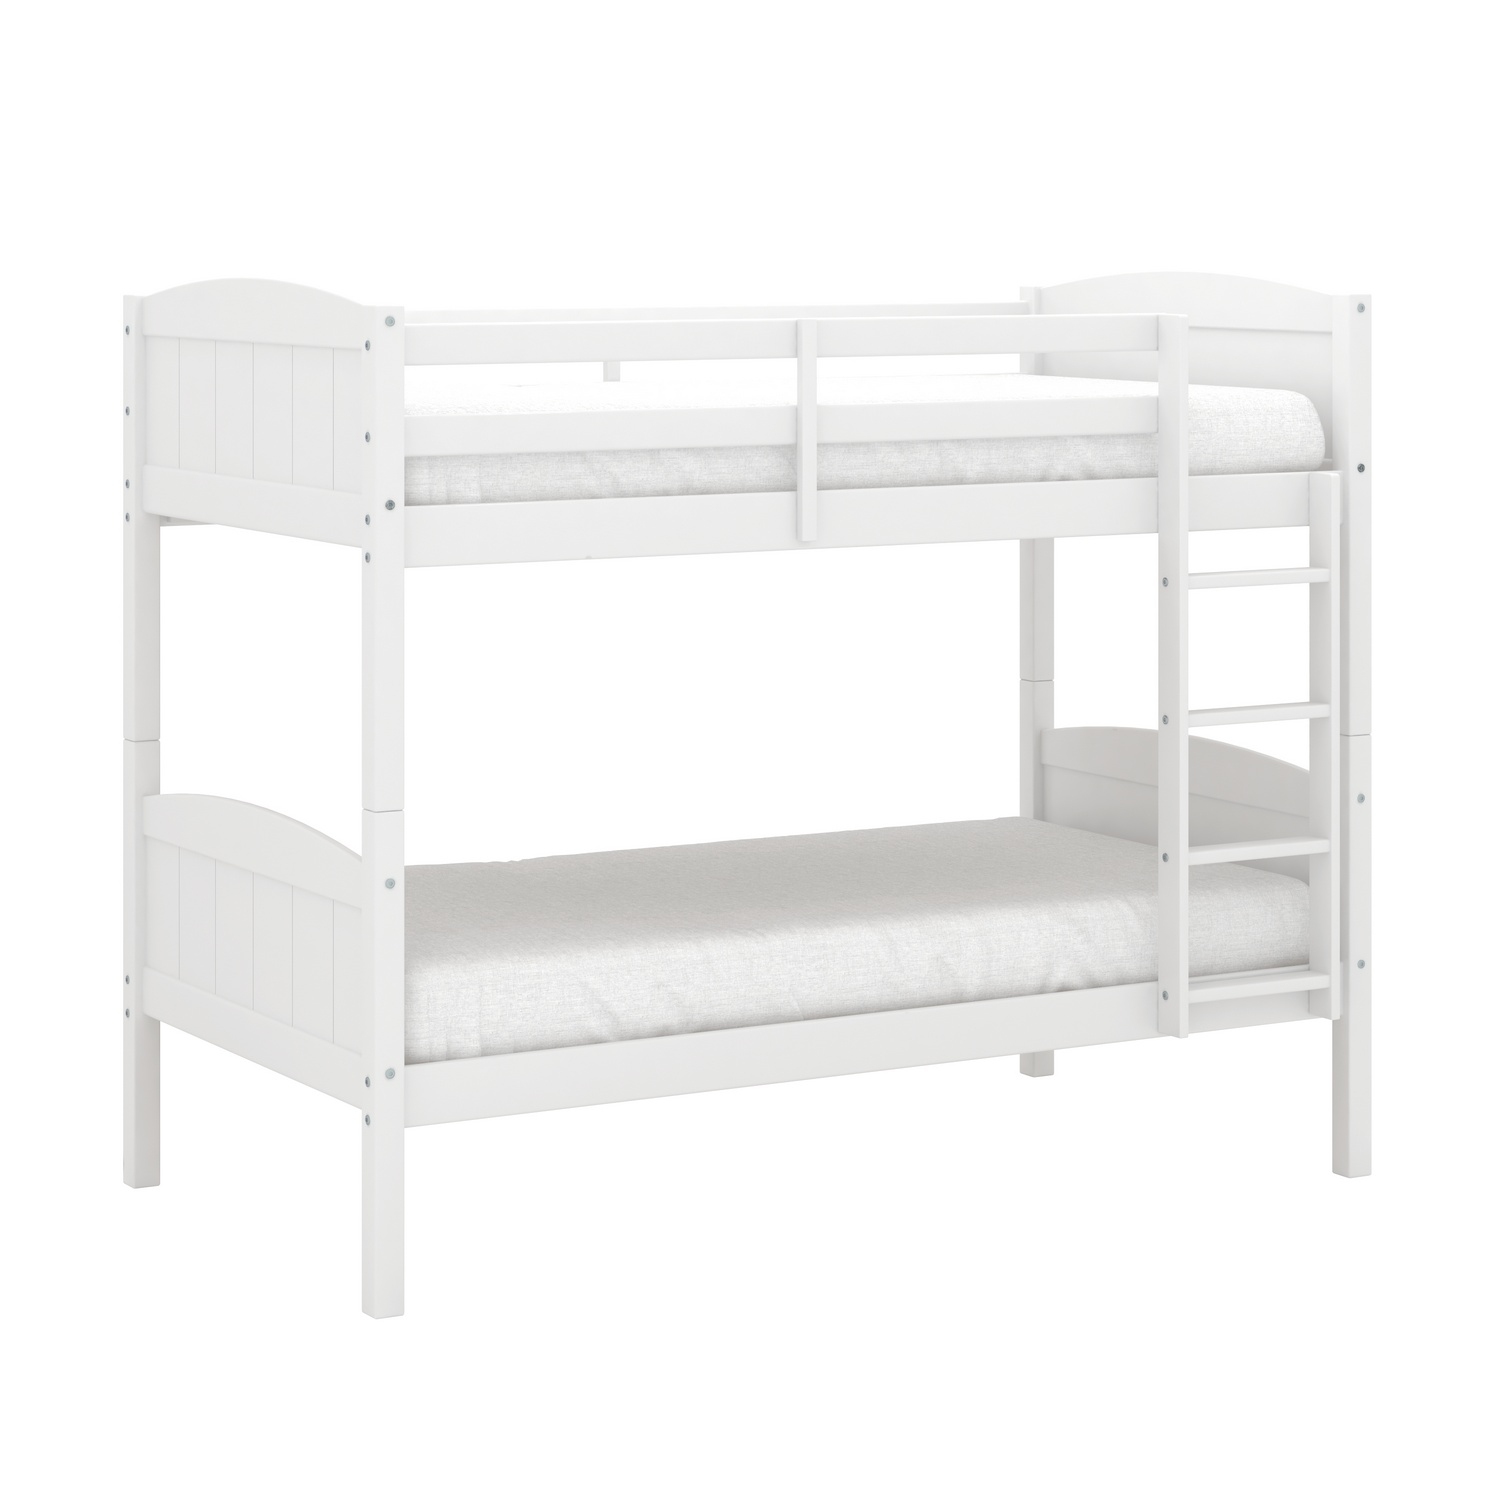 Hillsdale Alexis Wood Arch Twin Over Twin Bunk Bed - White